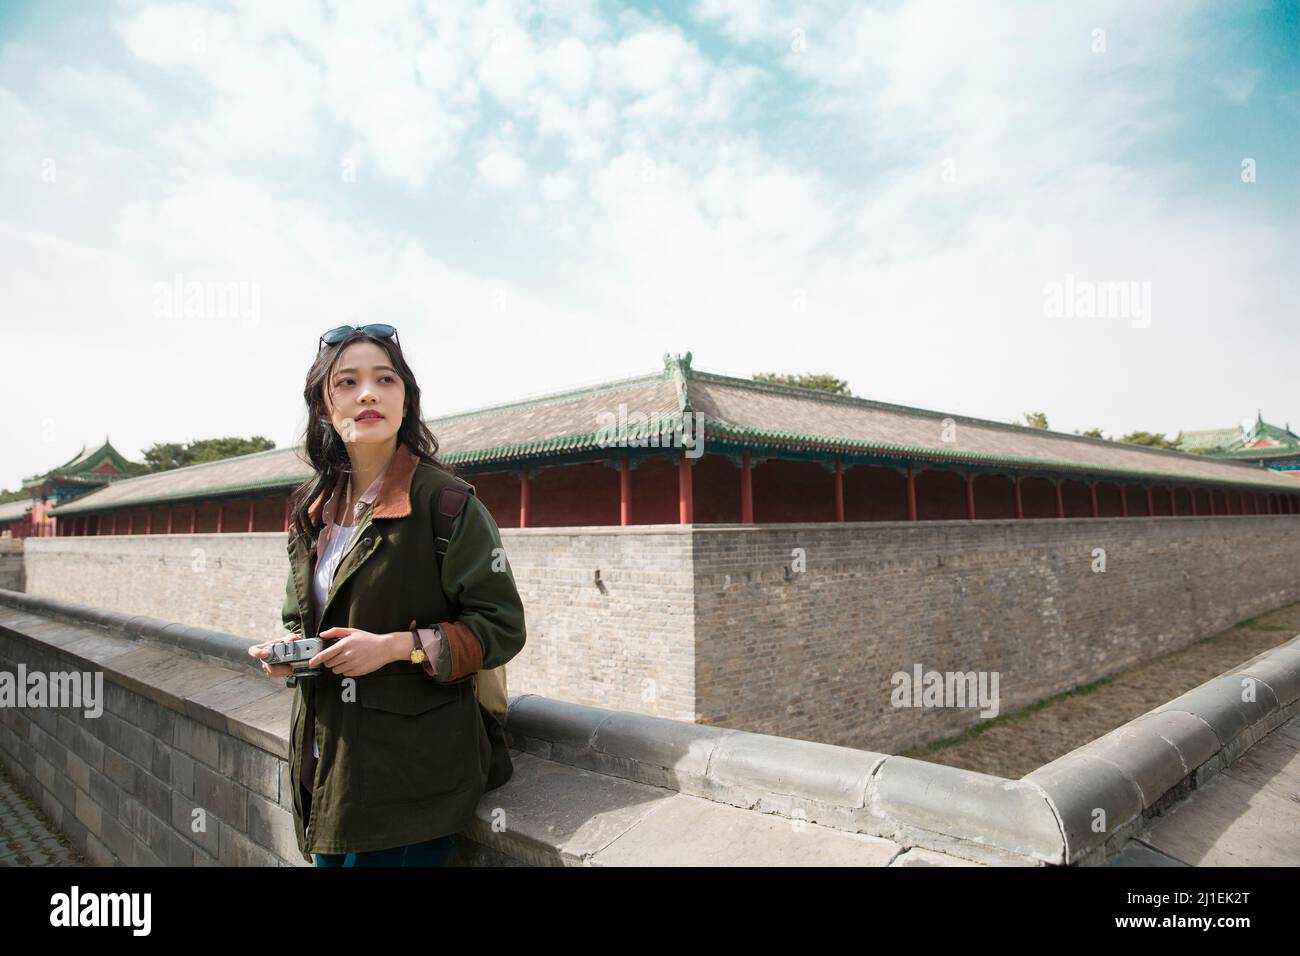 Young female tourist sightseeing on the walls of the ancient city - stock photo Stock Photo